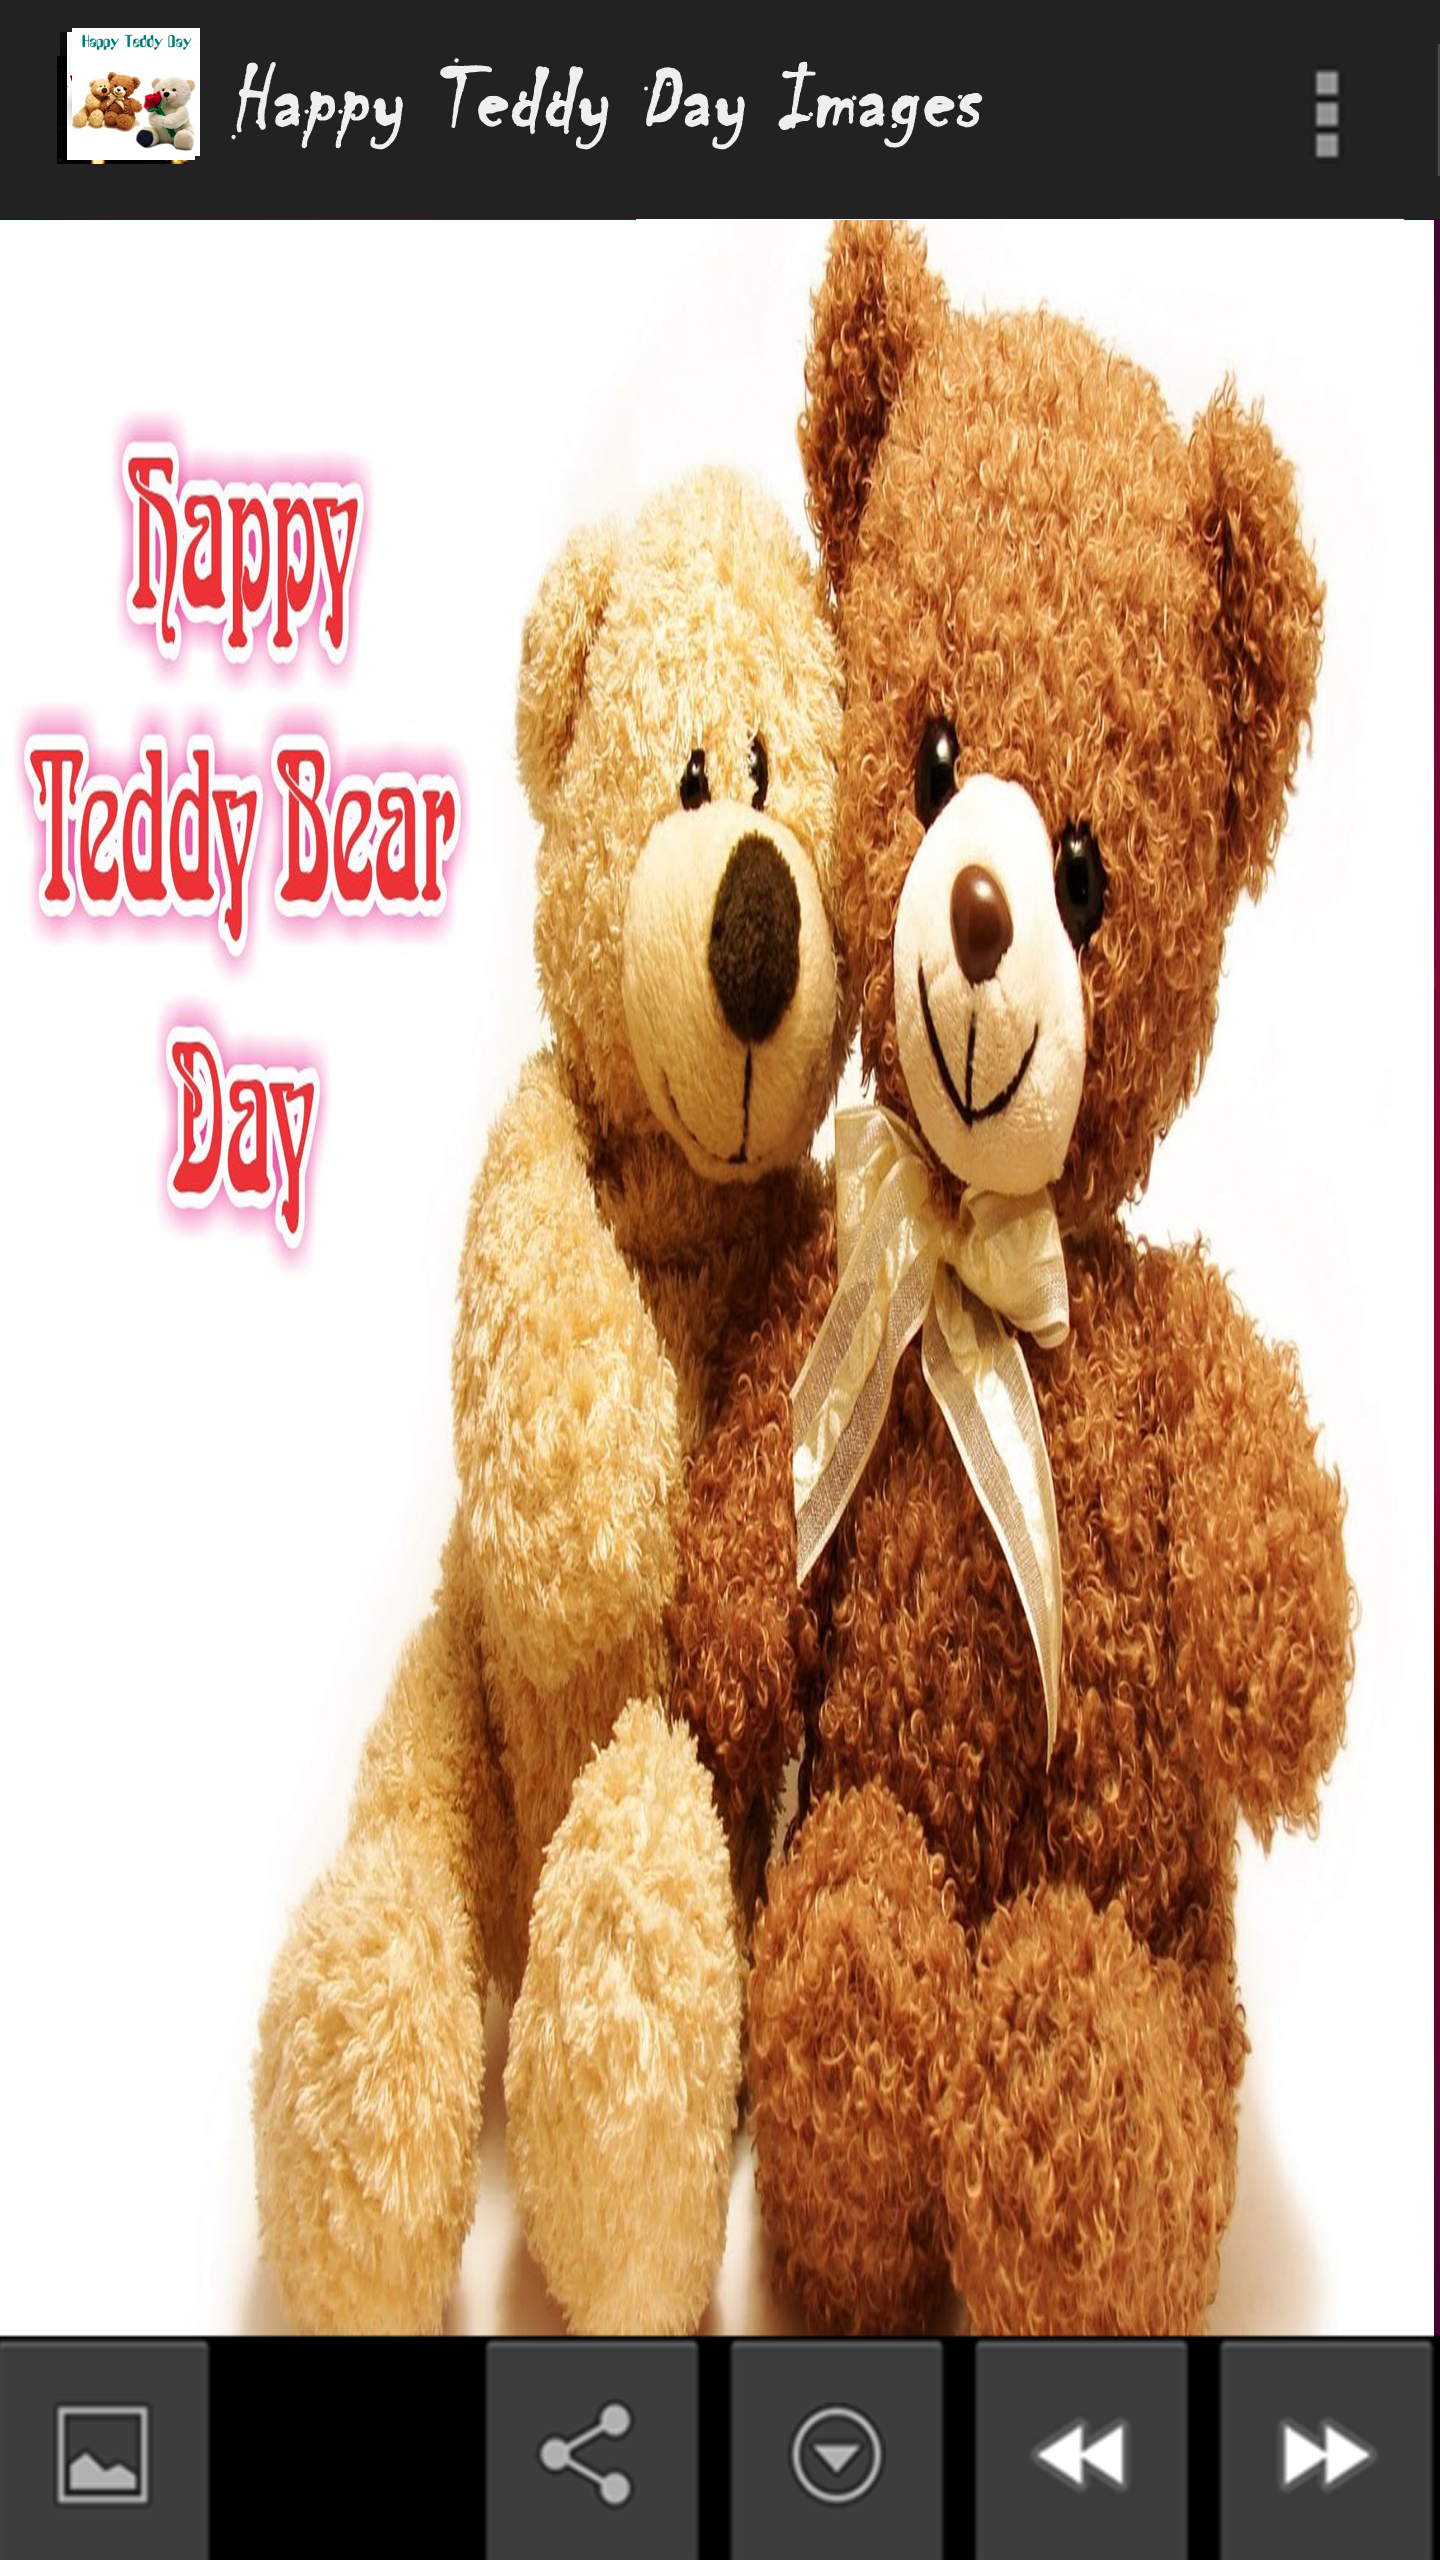 Android application Happy Teddy Day Images screenshort